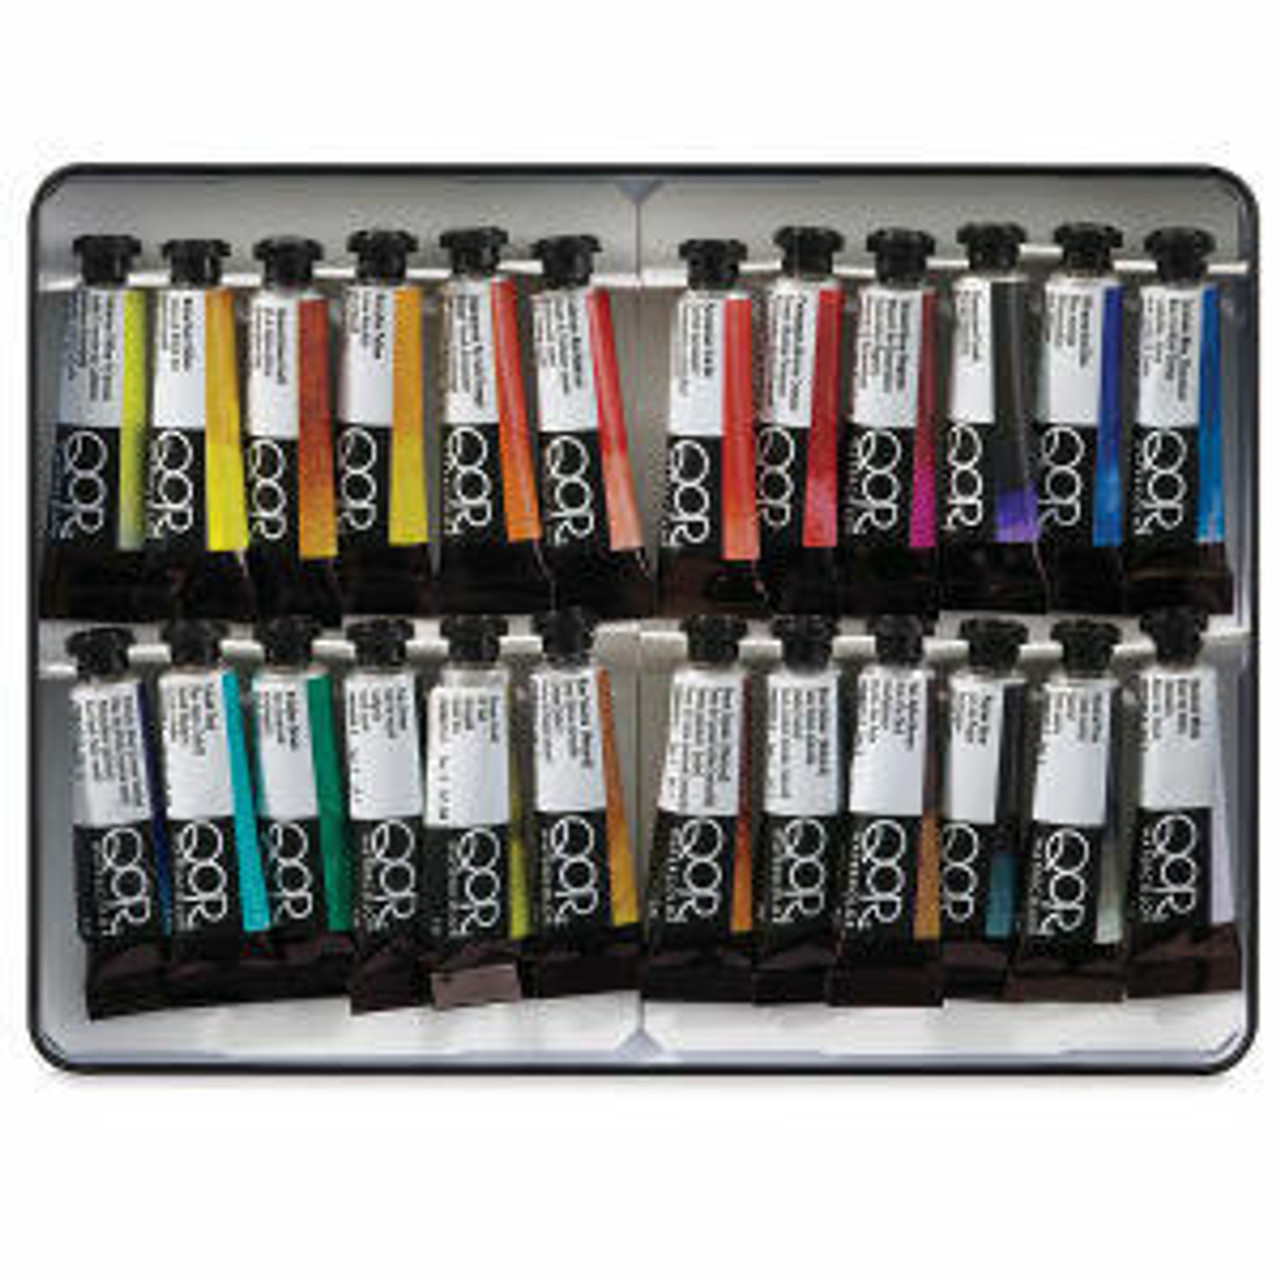 Createx™ Airbrush Color Opaque 6 Color Set